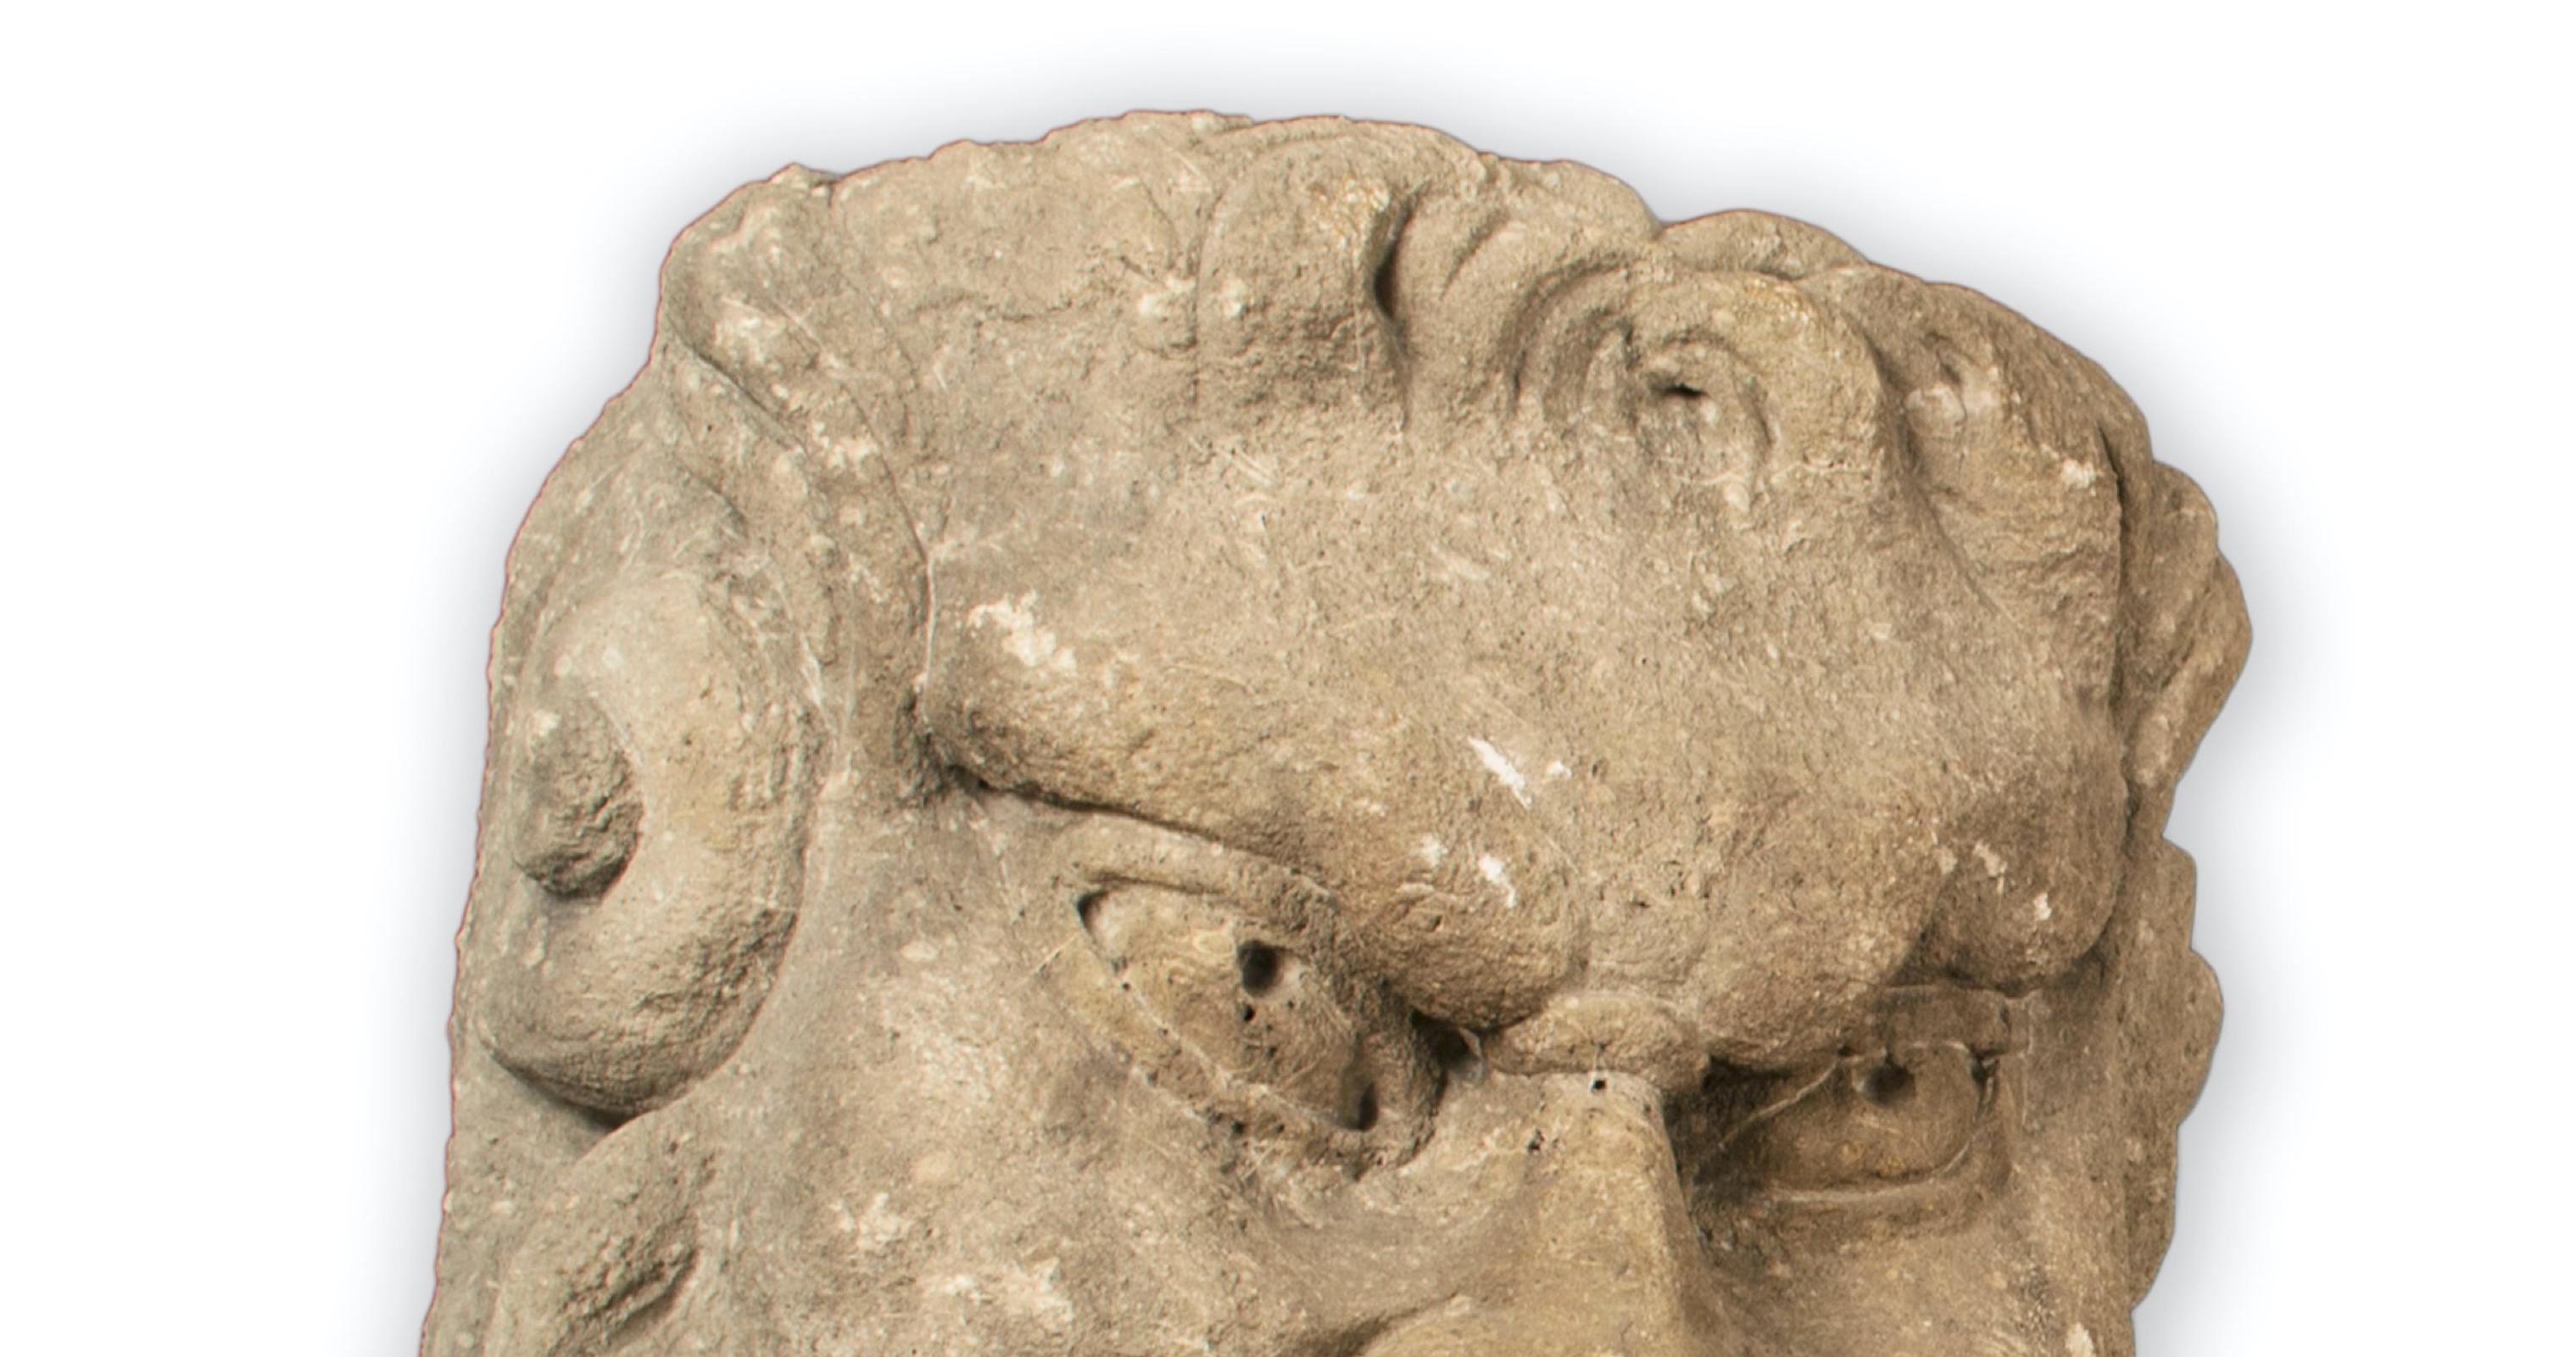 Taken from a Parisian manor built in the late 1500s, this large carved stone gargoyle is in near perfect condition.